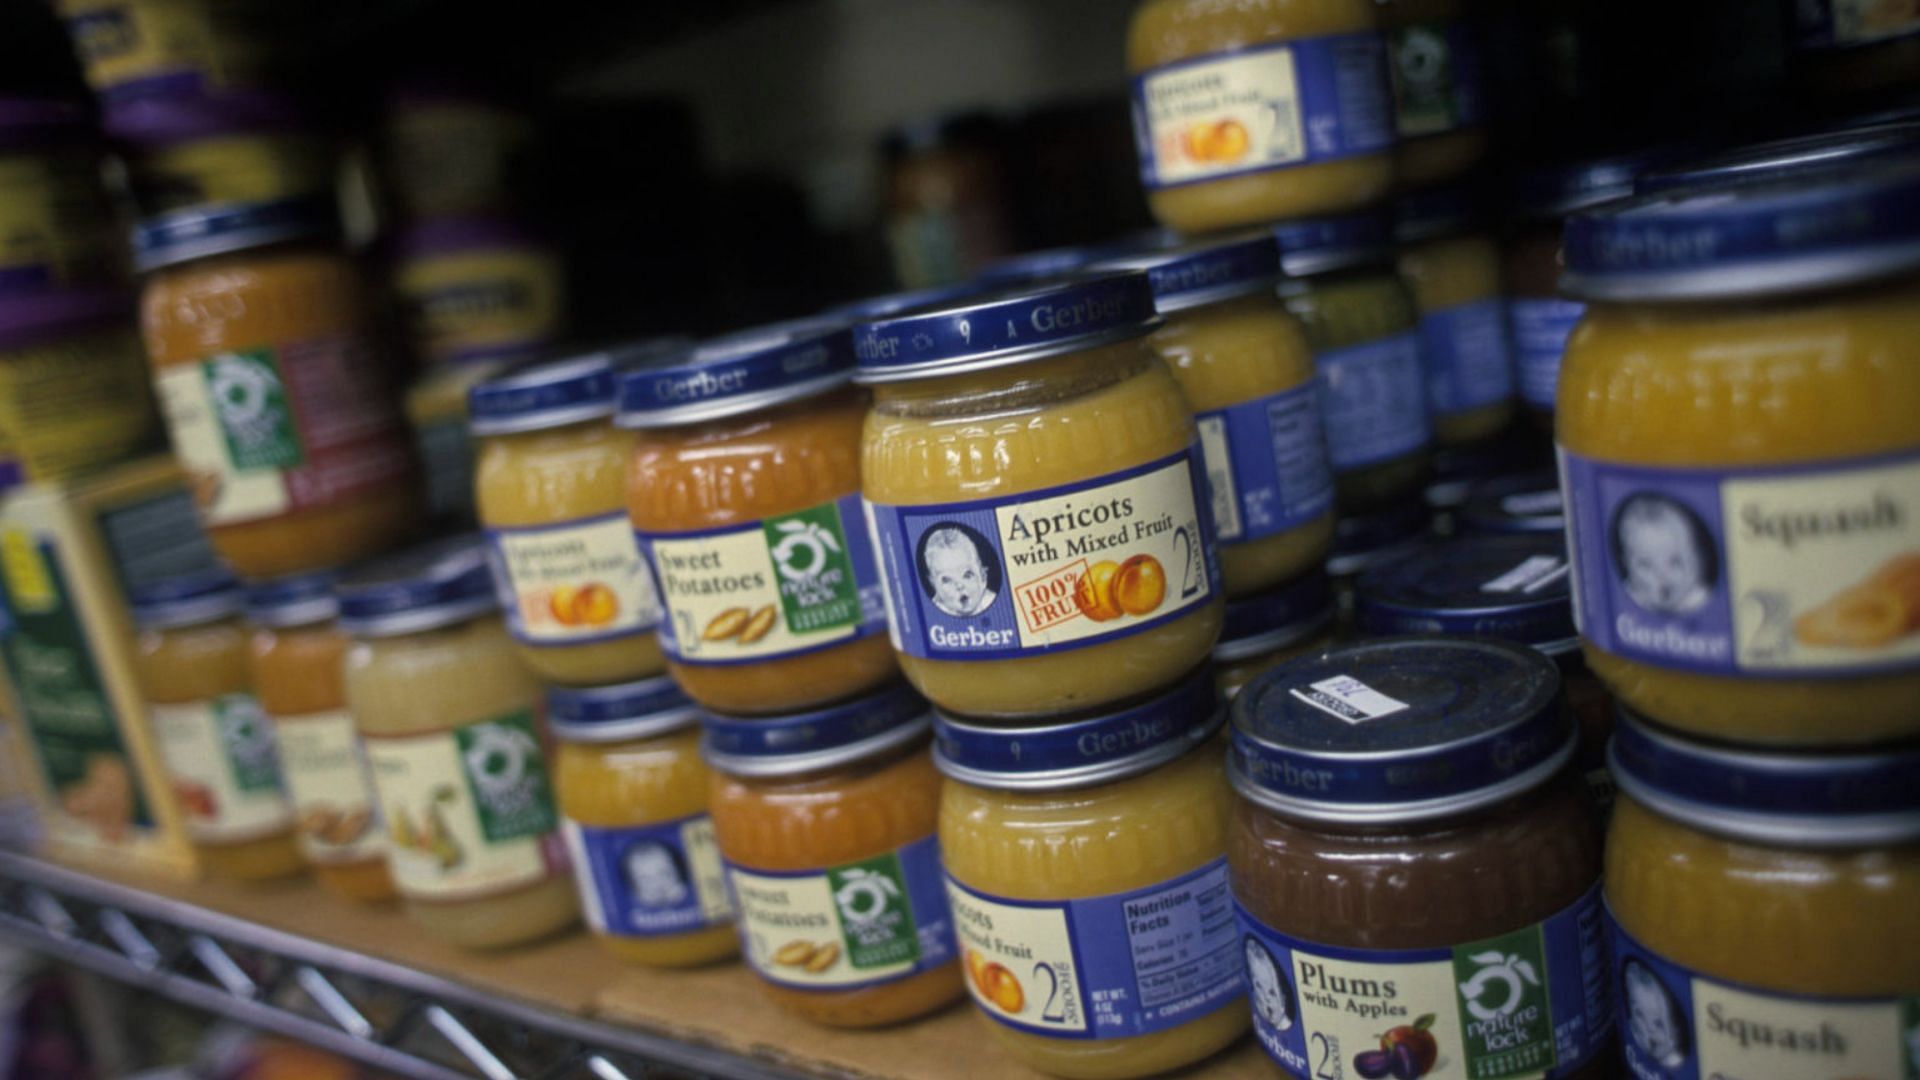 Processed baby food is used by parents all across the country to give a proper nutrition to their children (Image via James Leynse/Getty Images)